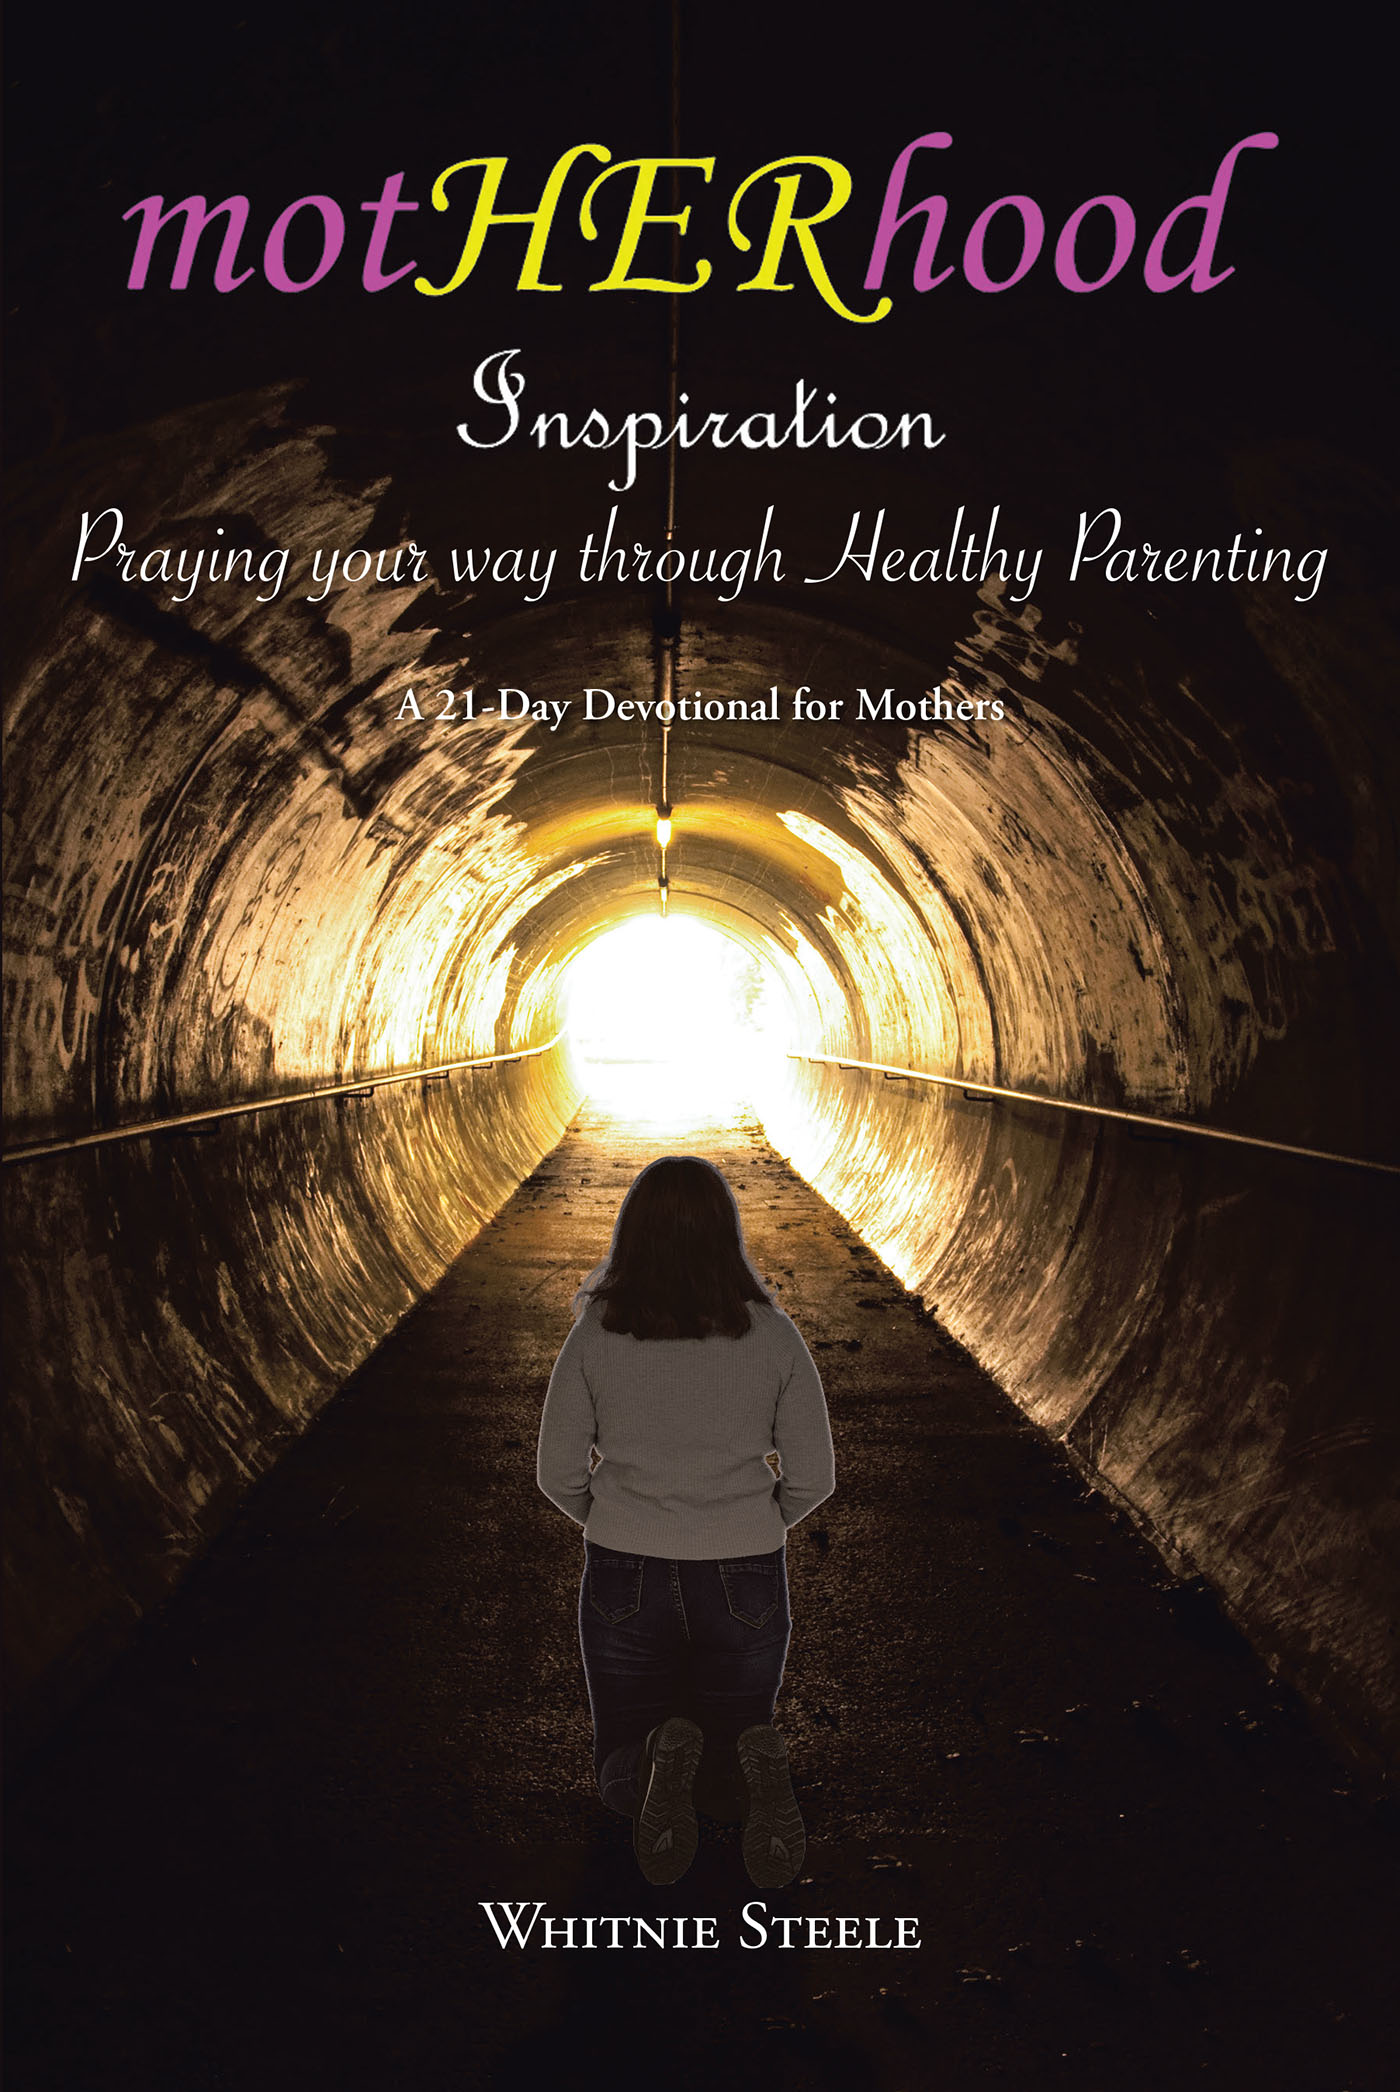 Whitnie Steele’s Newly Released “Motherhood Inspiration: Praying Your Way through Healthy Parenting: A 21-Day Devotional for Mothers” is a Touching Inspirational